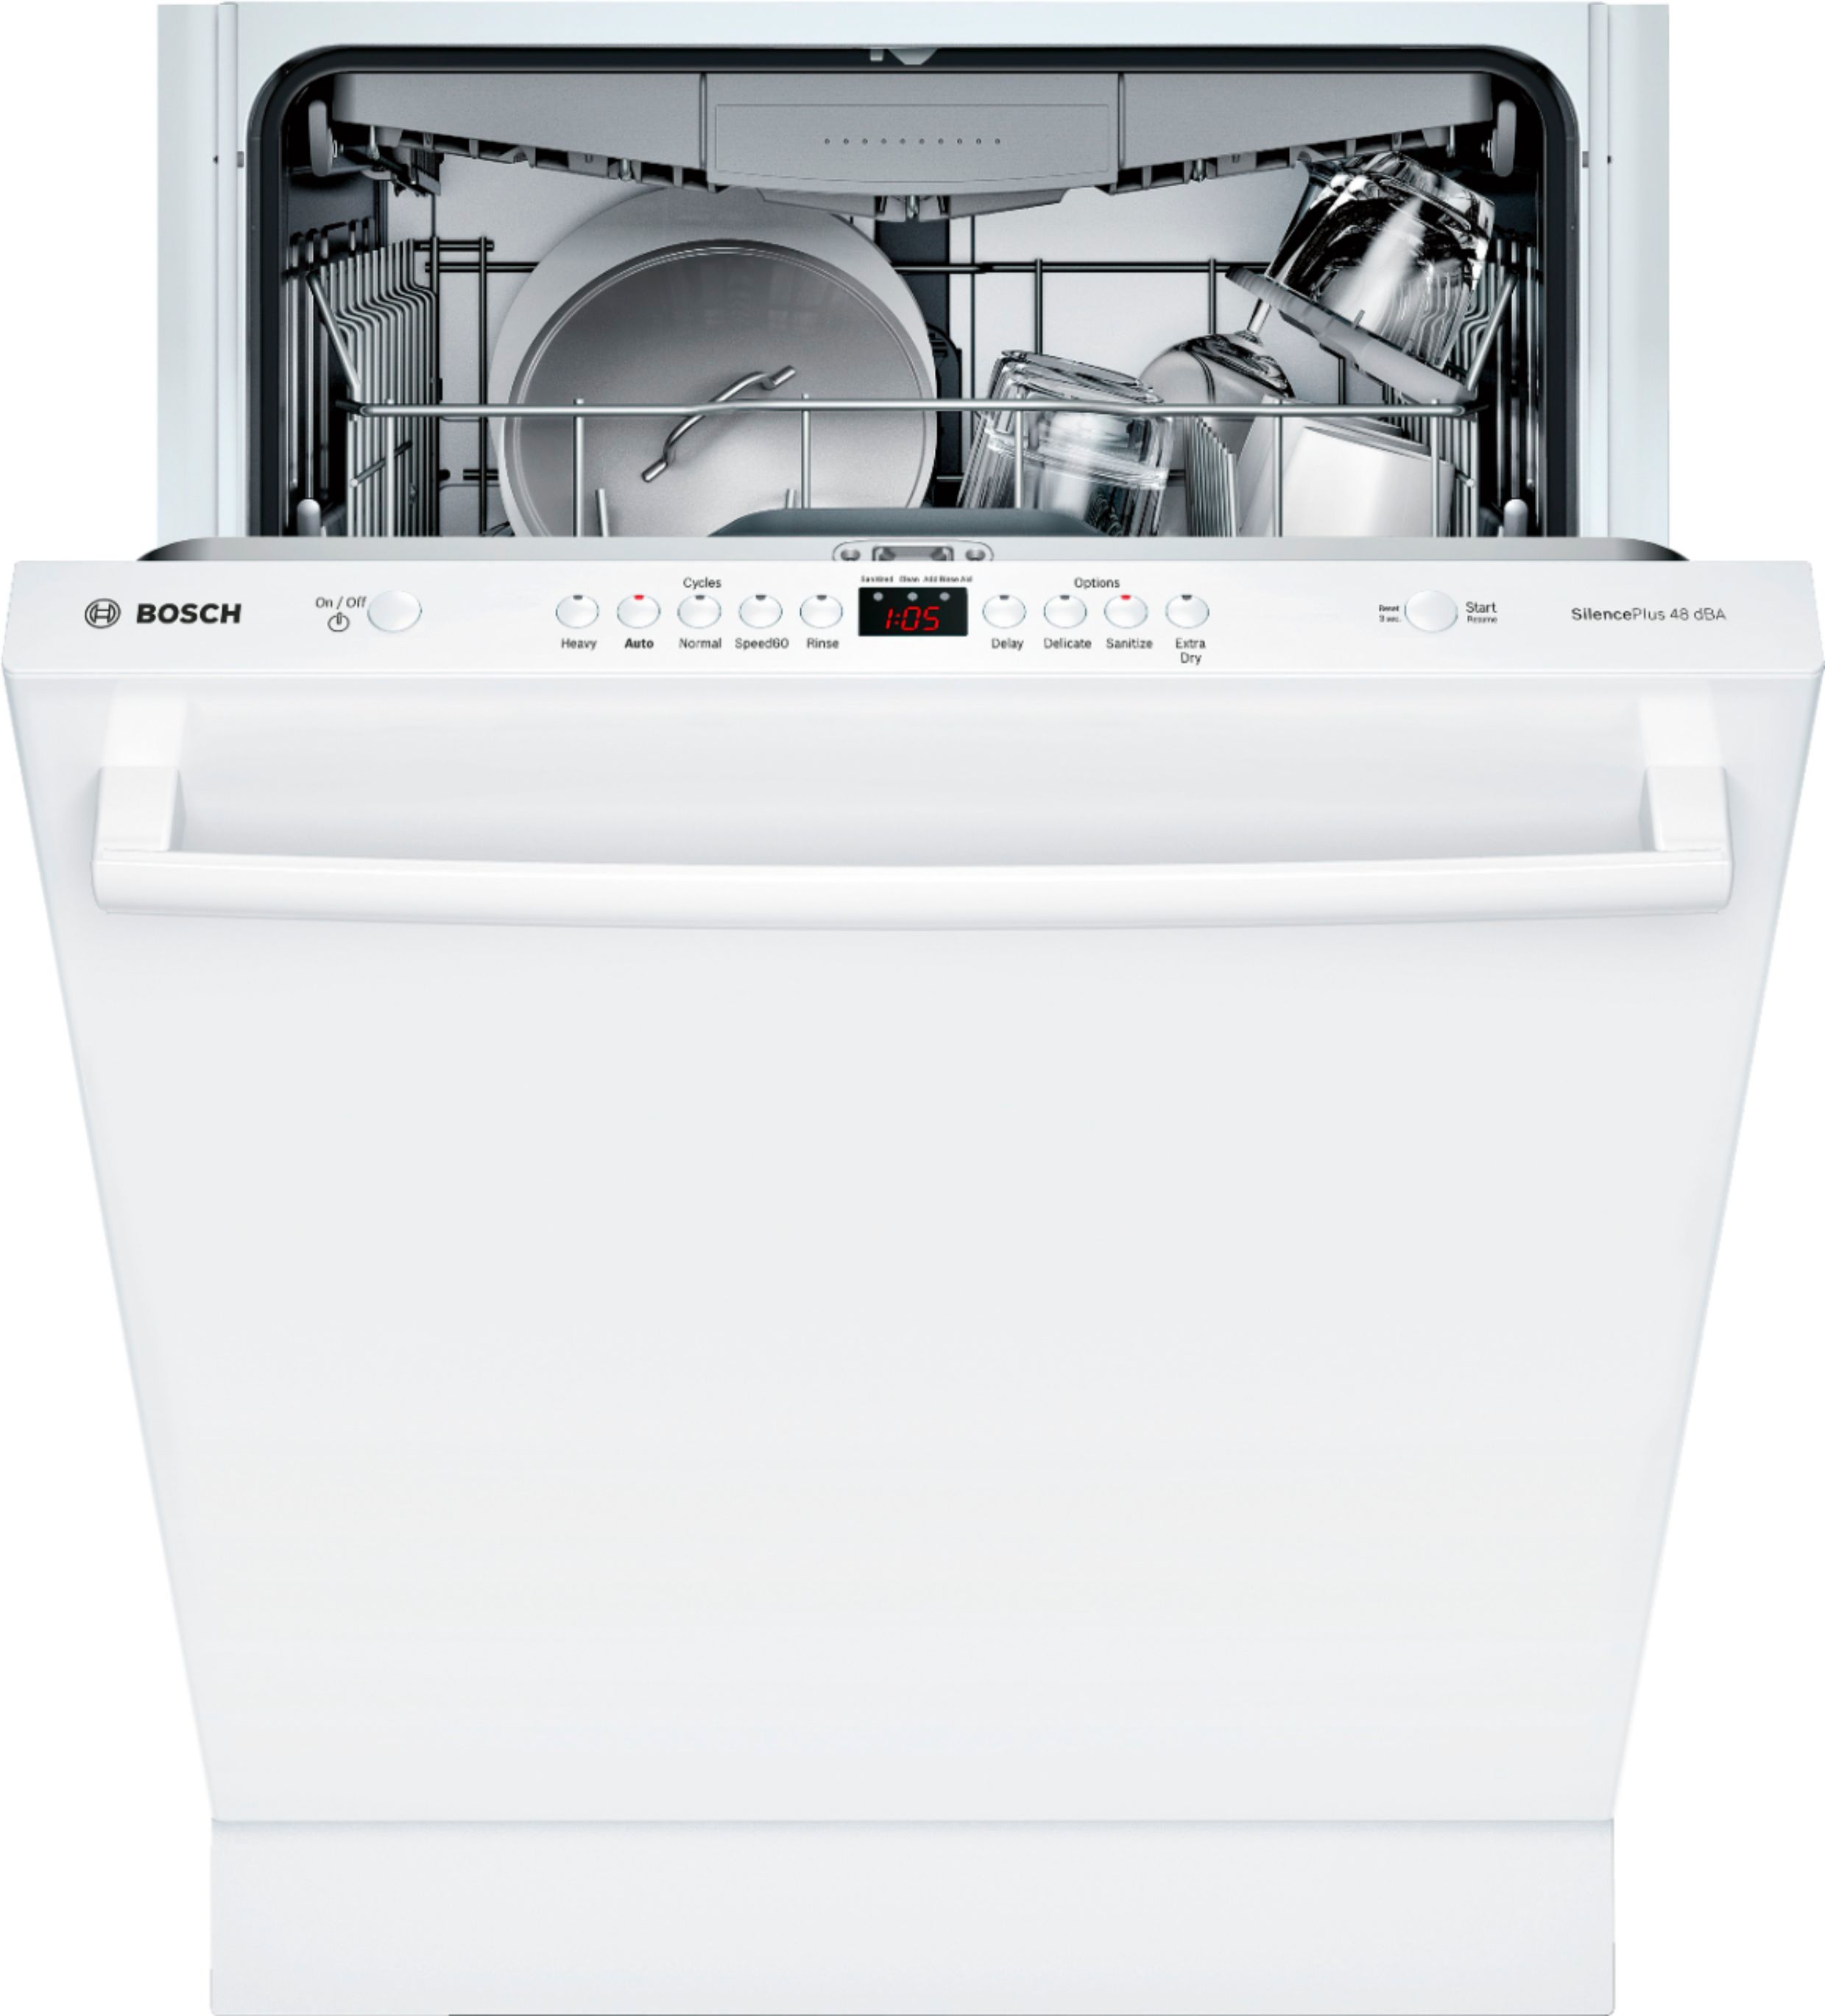 Costco] Bosch dishwasher 300 series, white only, in store AB, $949